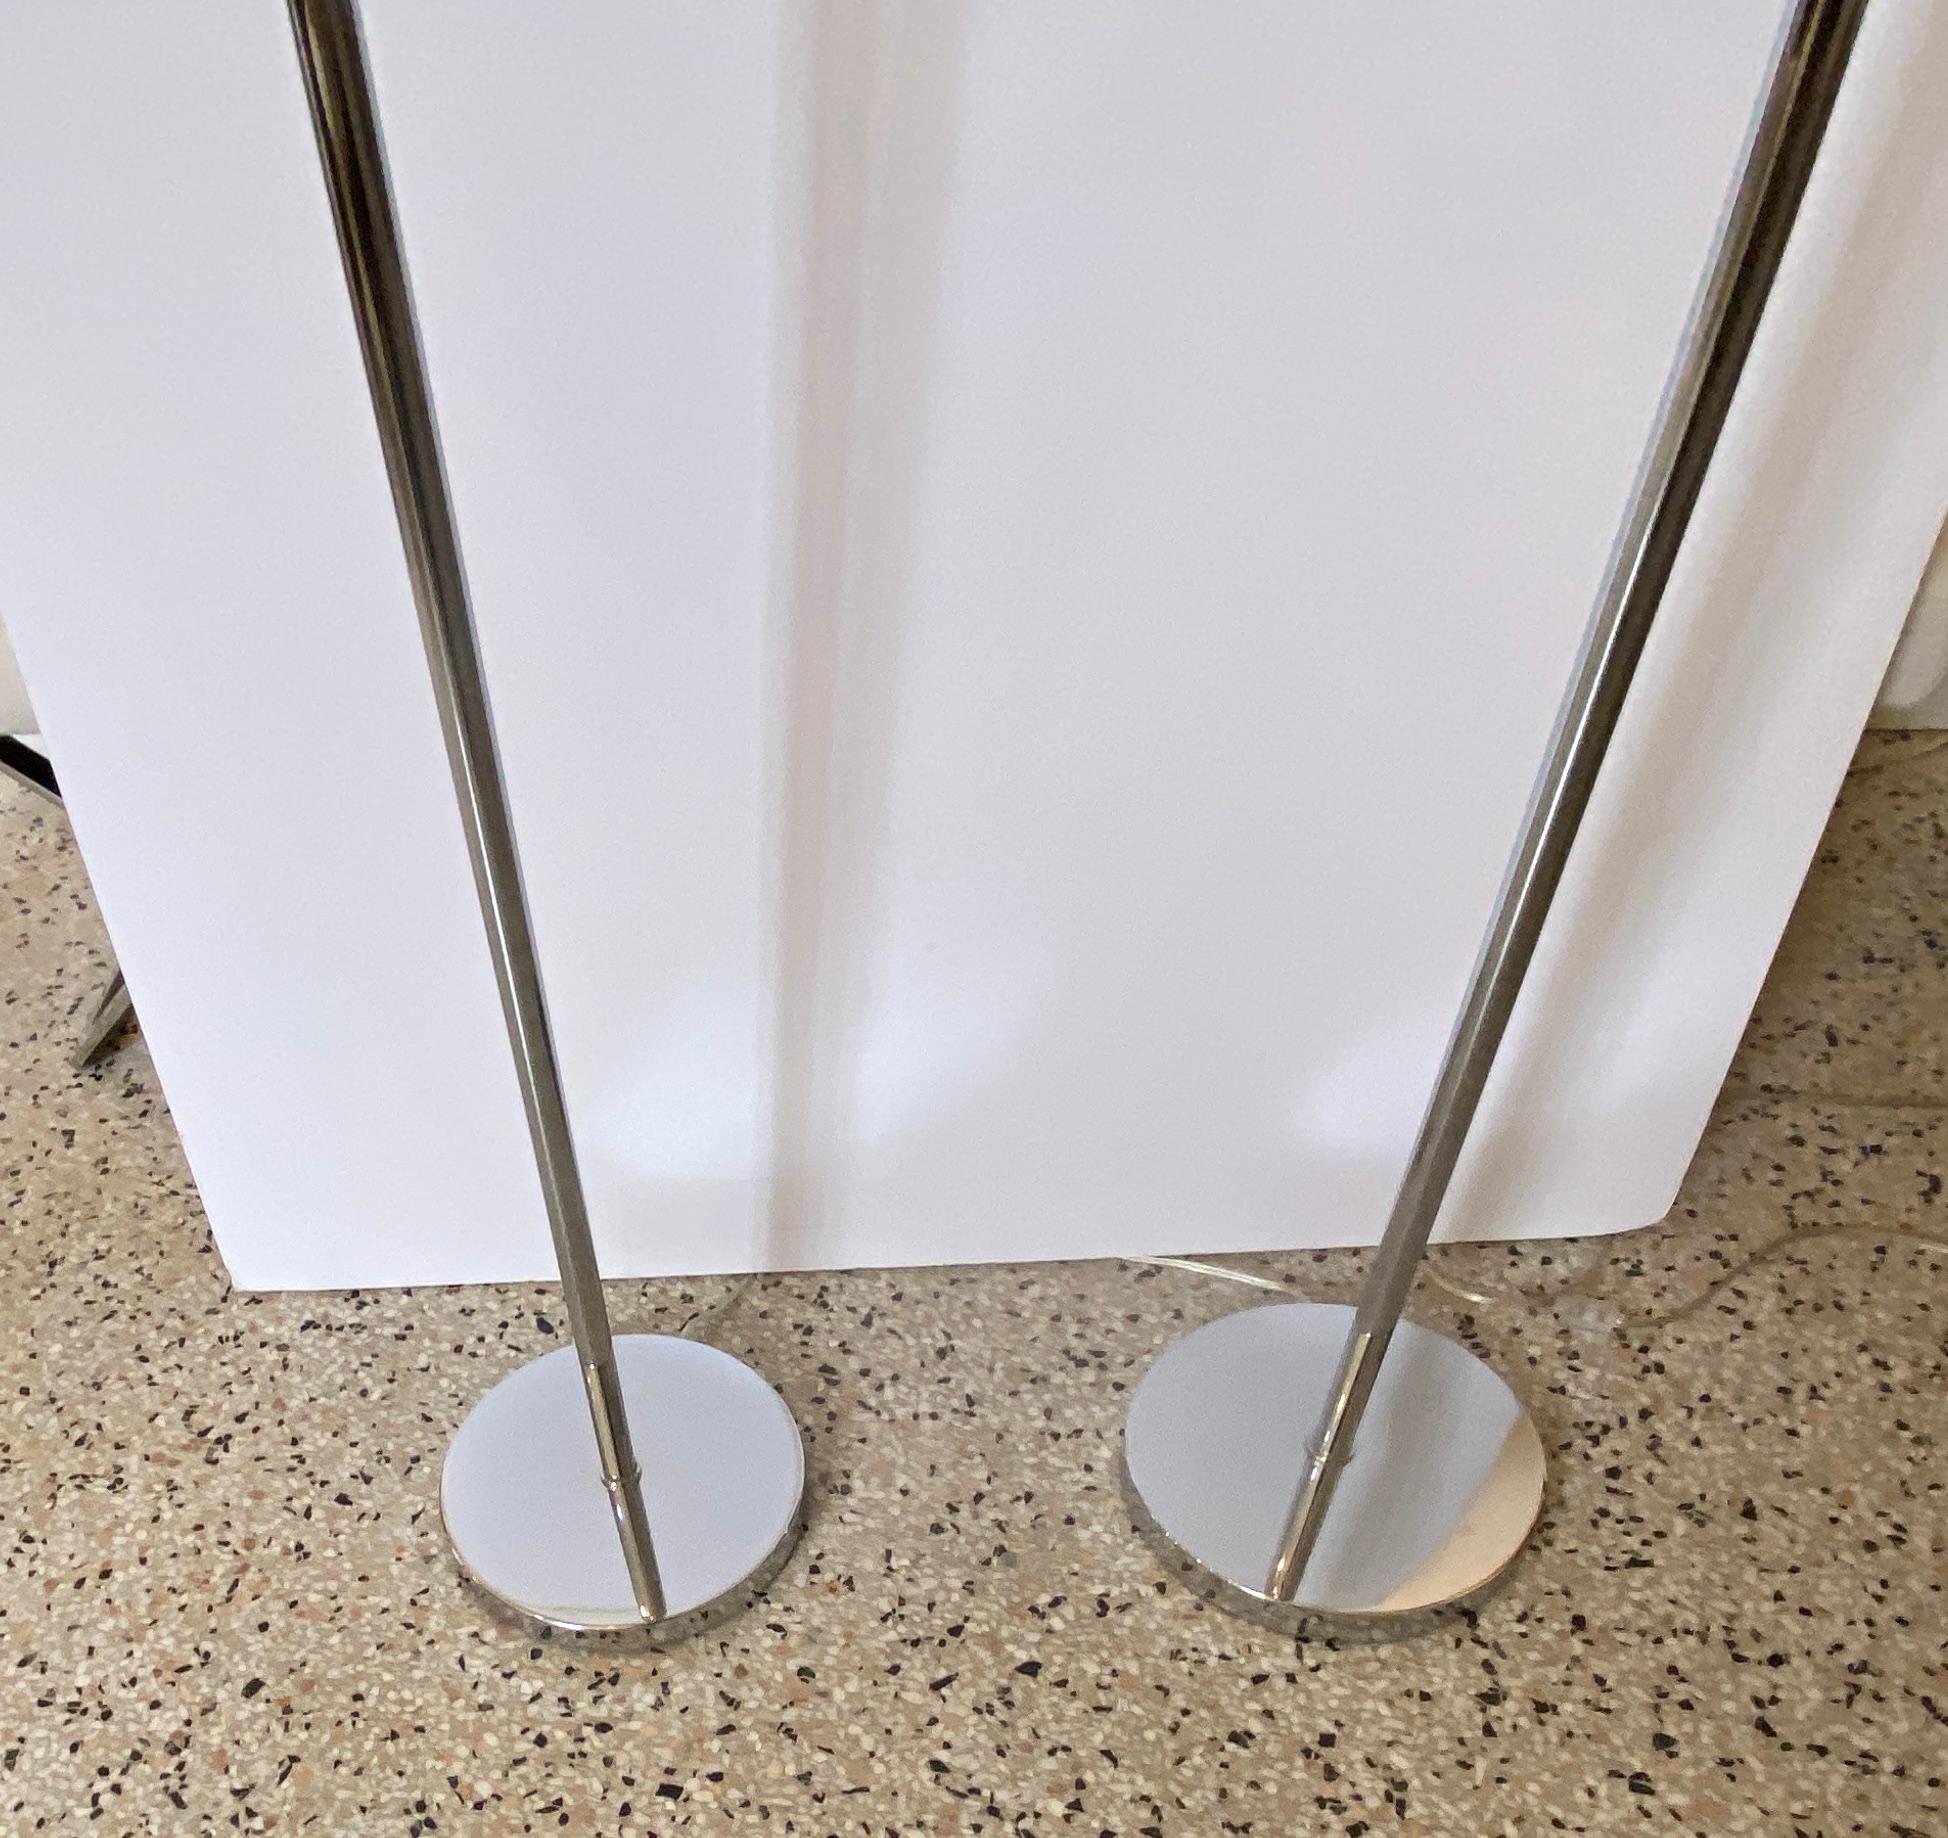 This stylish and classic set of Hansen floor lamps date to the 1970s and they are a married set that were made at different productions times.

Note: The shades are new and they are a white linen textures on a hard back.

Note: The lamps finials